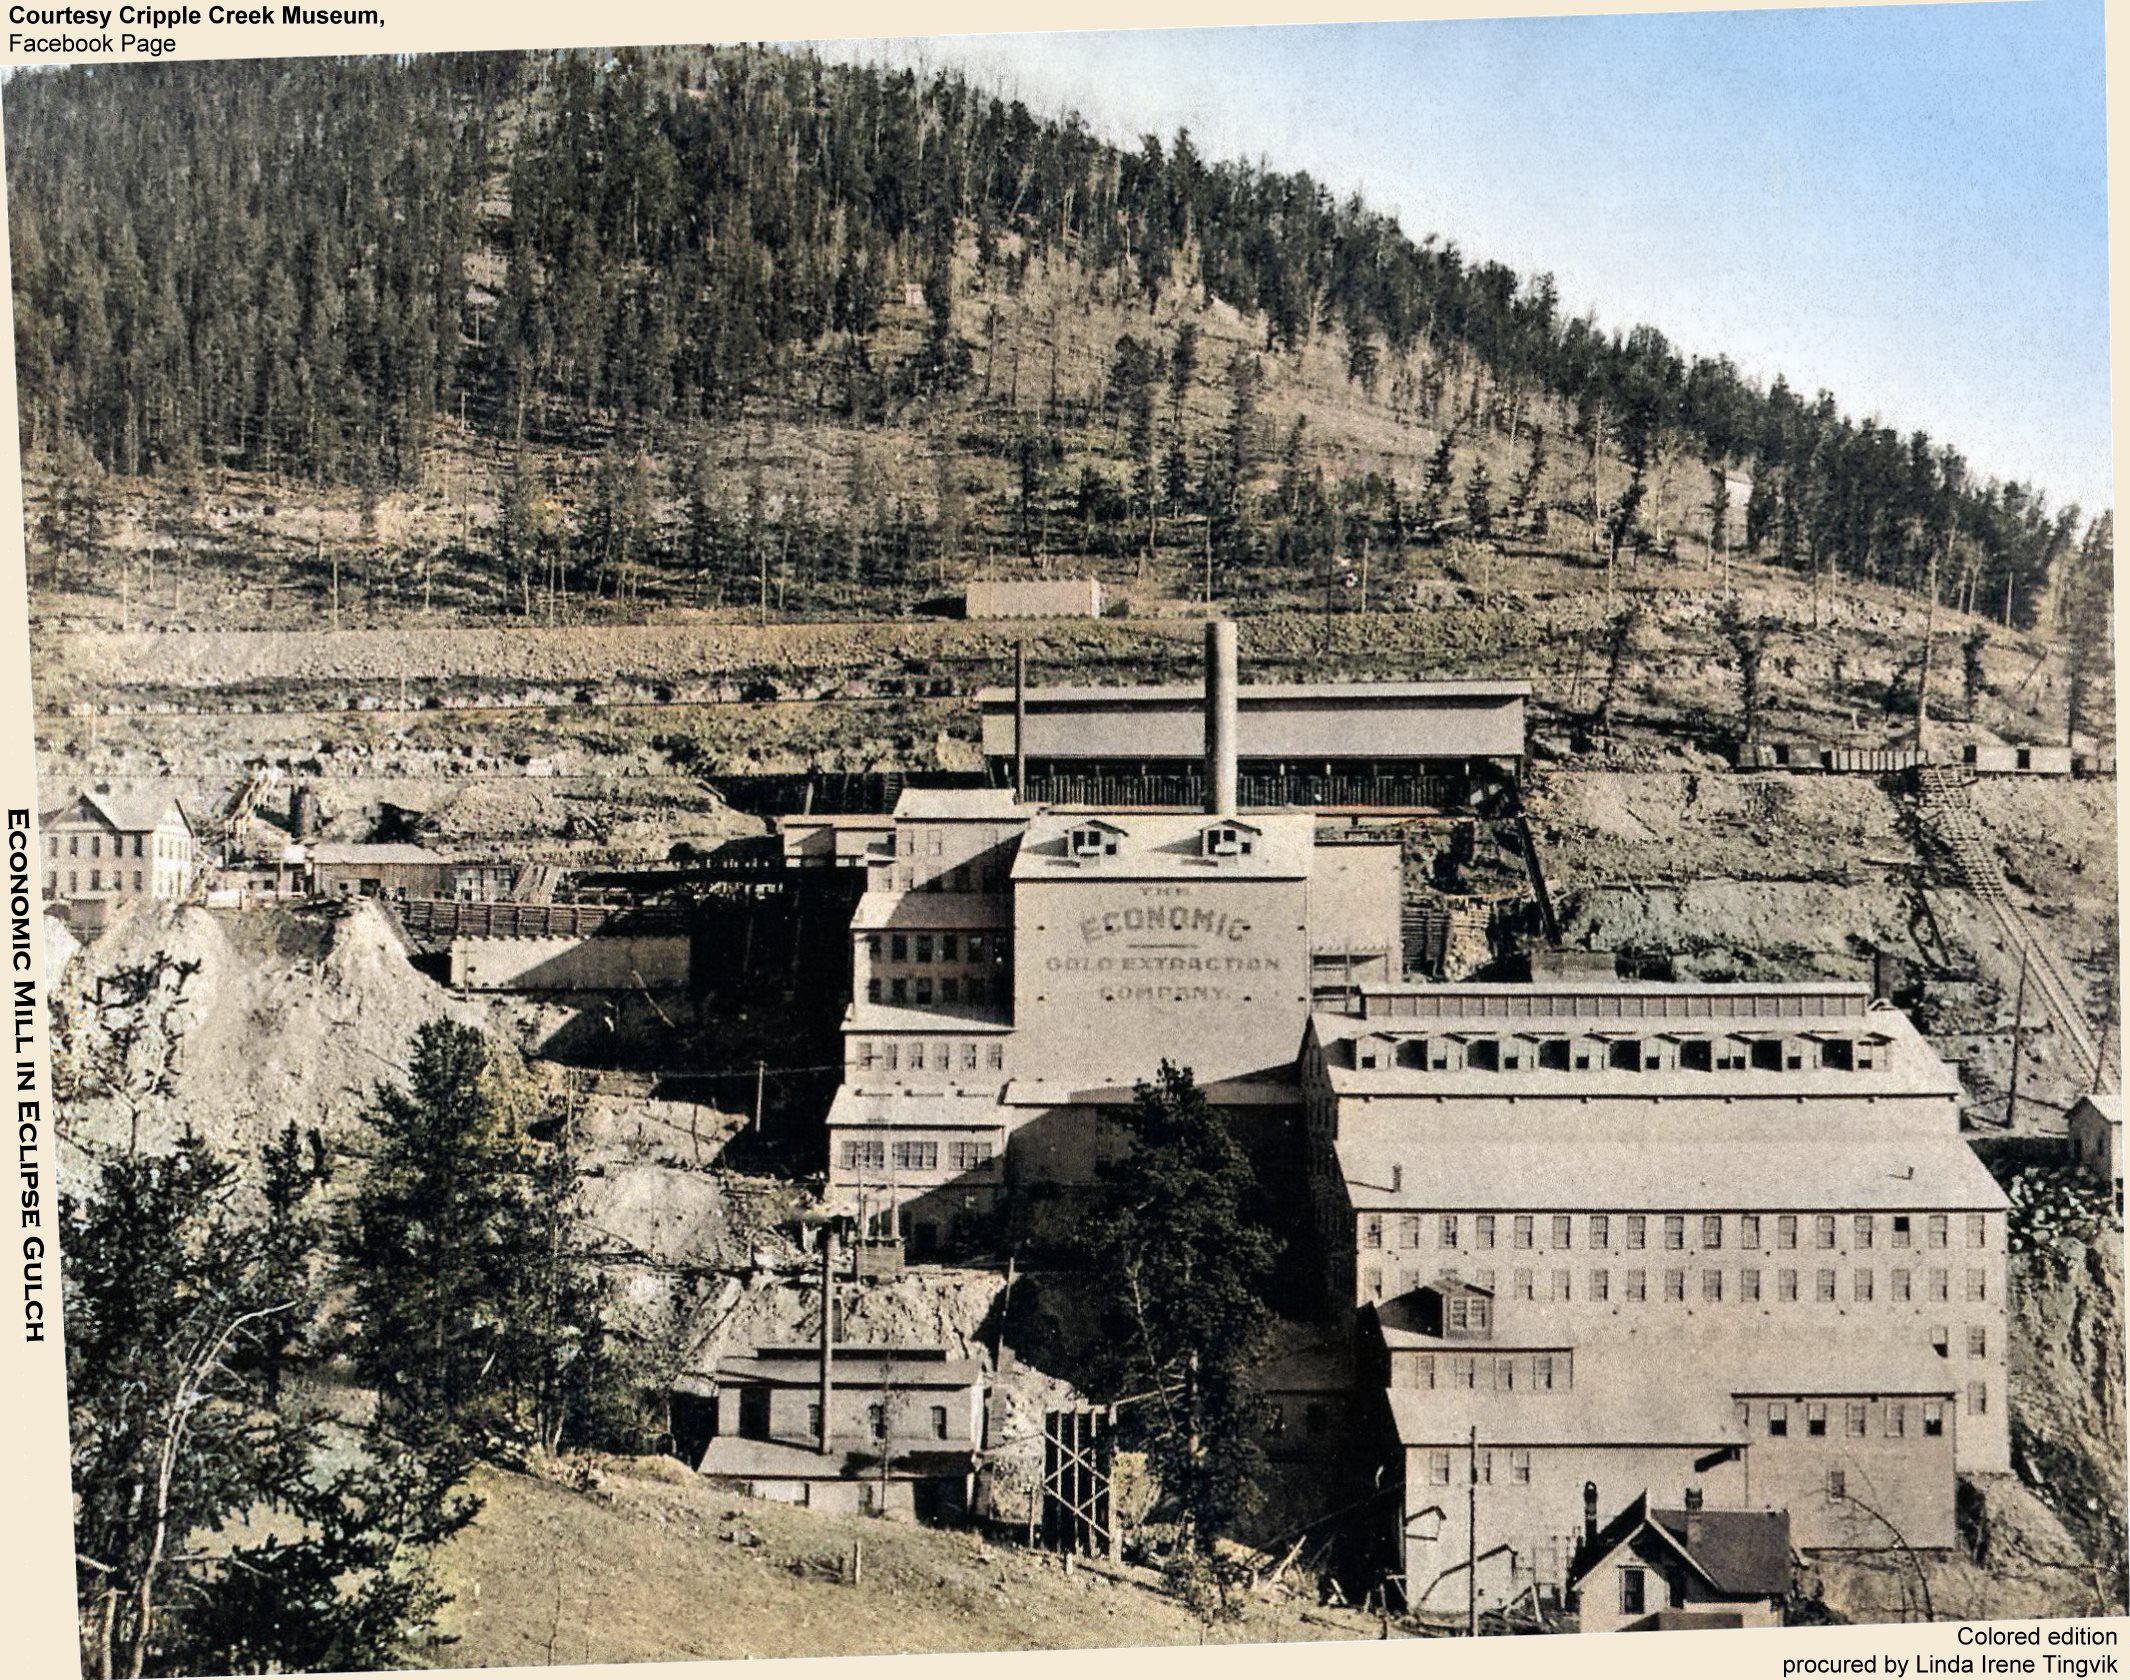 This is a view of the second edition of the massive Economic Mill in Eclipse Gulch, on the west part of Squaw Mountain. First edition stopped at the large wall in lower right with all the windows on it. Around 1903 there would be other changes, the most visible one is that the tunnel portal structure changes from what I her see as a shed like structure into a larger house look with an arched entry.
   Regarding this scene though, they have built the Ore-shed up at the railroad yard where the 3-foot narrow-gauge F. & C.C. enters from the left, while from the right, the Short Line had a spur coming in from a sort of switch back as the roadbed of the Low Line and Short Line is seen about 1/3 down from top of image, the second highest roadbed in this view. There is a square Water-tank of 52000-gallons size that was iron-cladded up there alongside the tracks of the Low Line. Above that track is the Midland Terminal, and below is the mainline of the F. & C.C.
   The structure all the way at left about middle top/down was a brick structure holding the Office and Assay Office, while the smaller structure about 1/3 in from left-hand side and just up from bottom, the one with the high narrow smokestack on it, as per a Sanborn Fire Insurance map, was also a brick structure holding a boiler and marked as Laboratory. Rest of the structures seen are wood covered in iron-clad sidings, painted.
   I did procure the colored version of this image. Source was gray-toned, or in common speech black & white. Used an online service and tweaked and worked with image to get what looks best to my eyes for the moment.